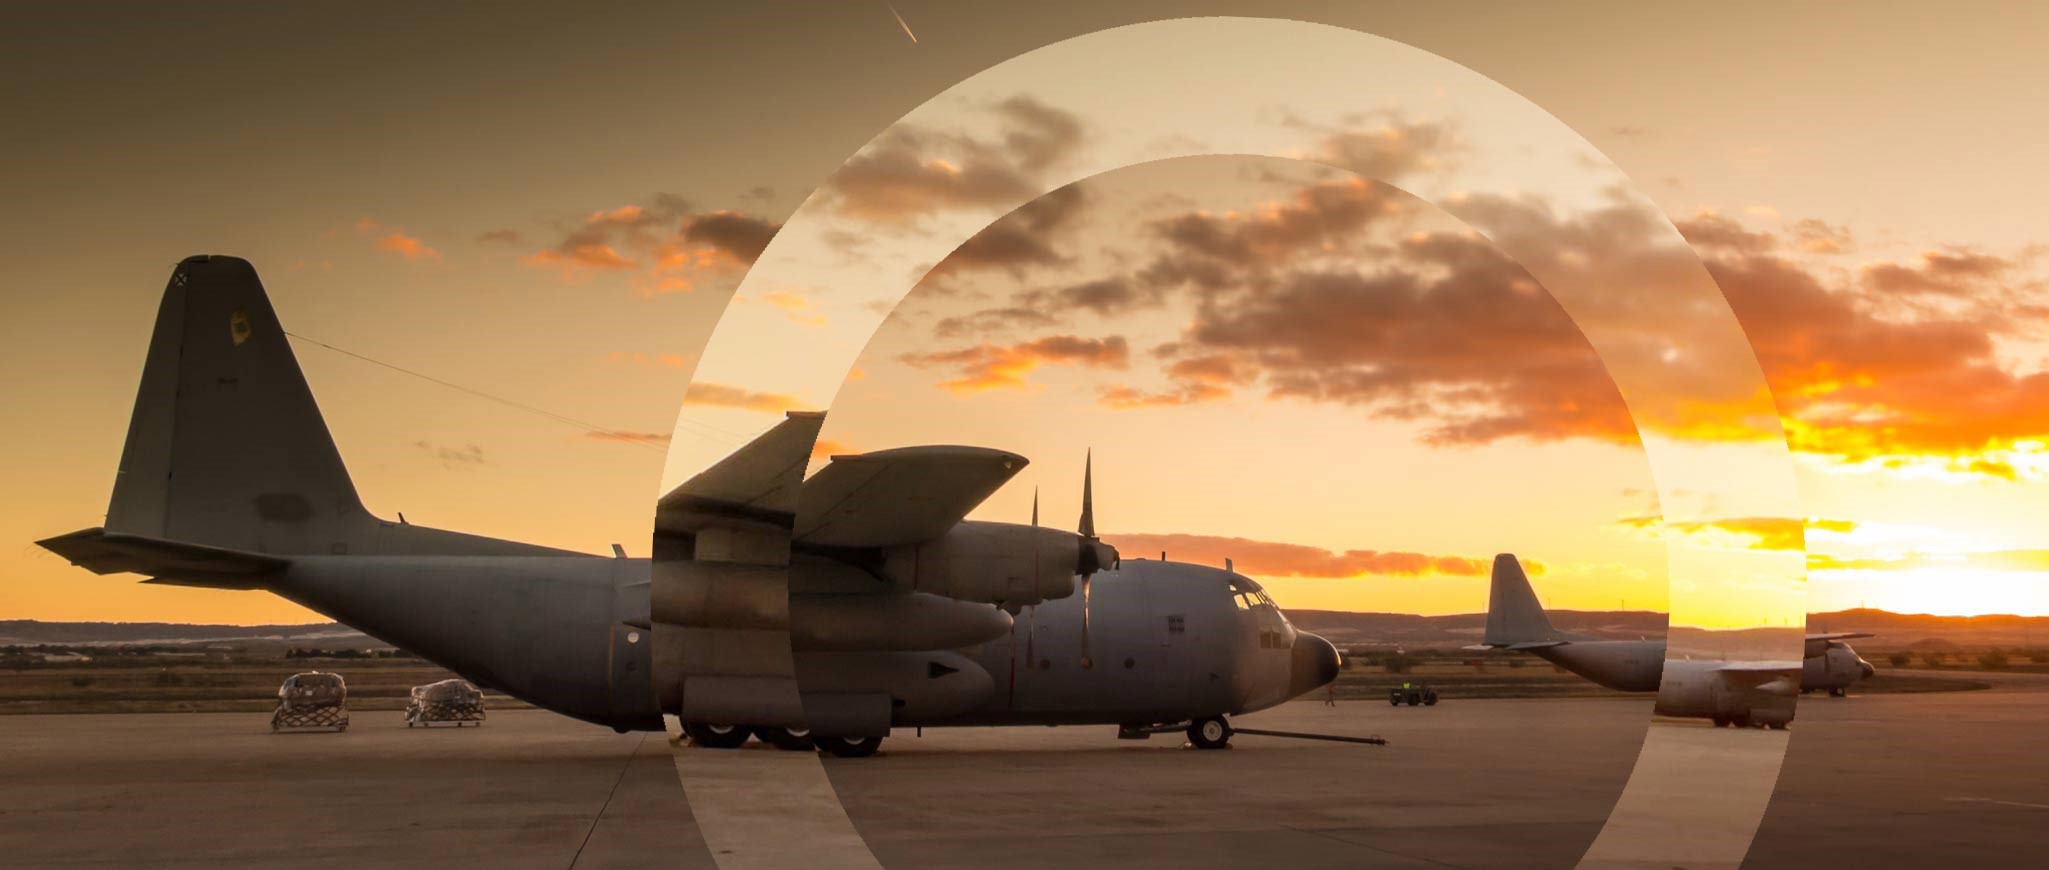 Eclipse Global Connectivity defense aviation